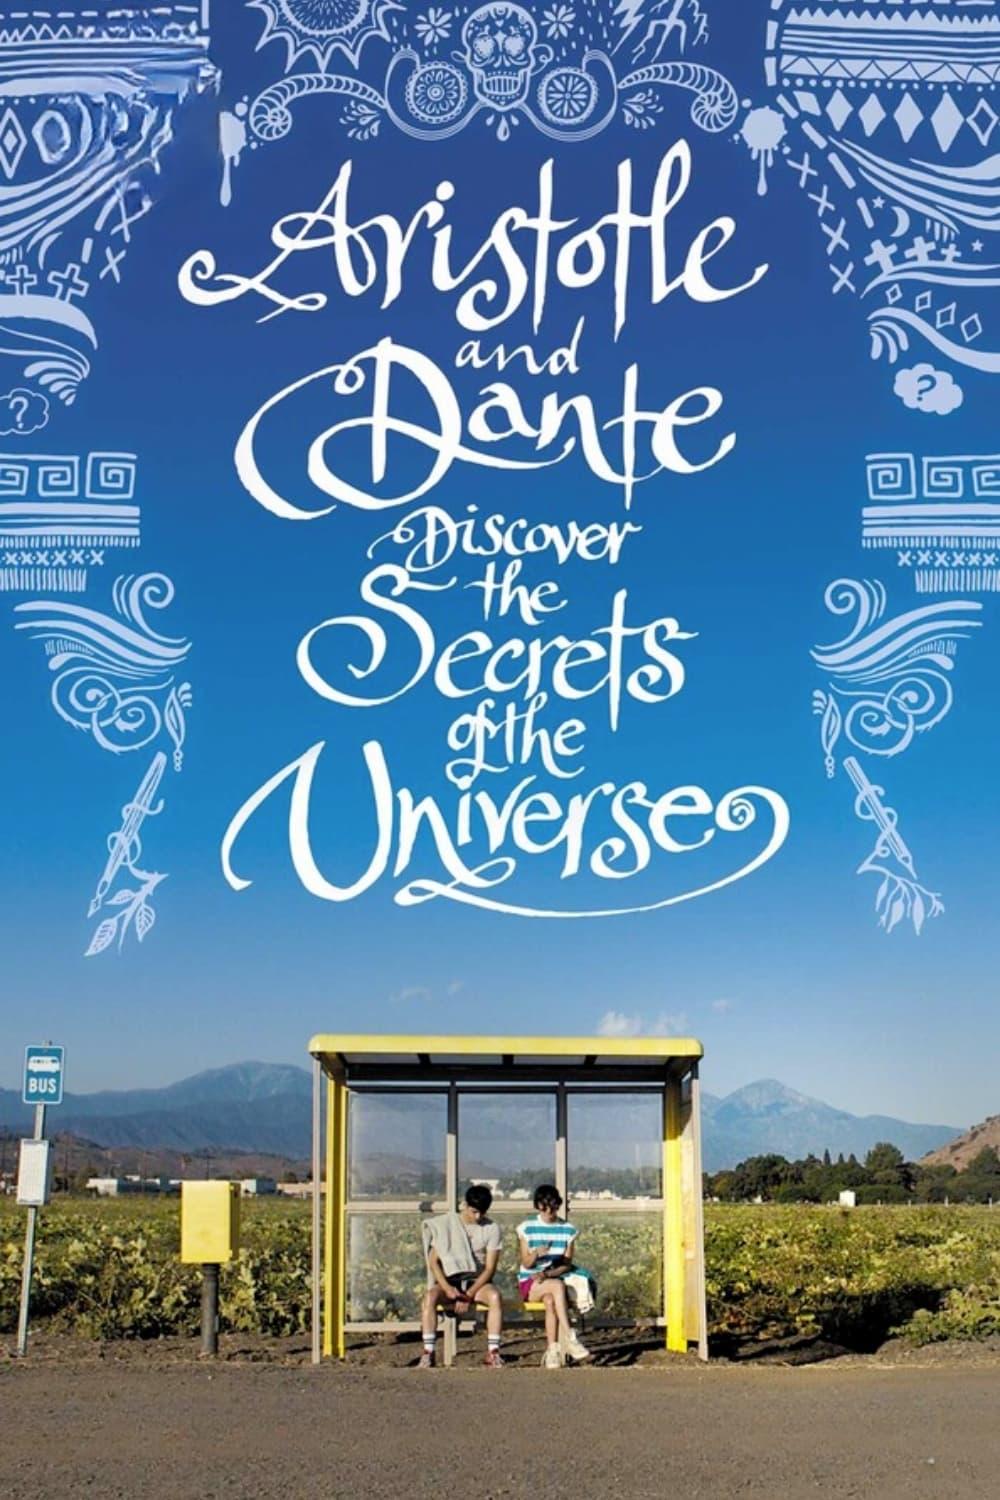 Aristotle and Dante Discover the Secrets of the Universe poster